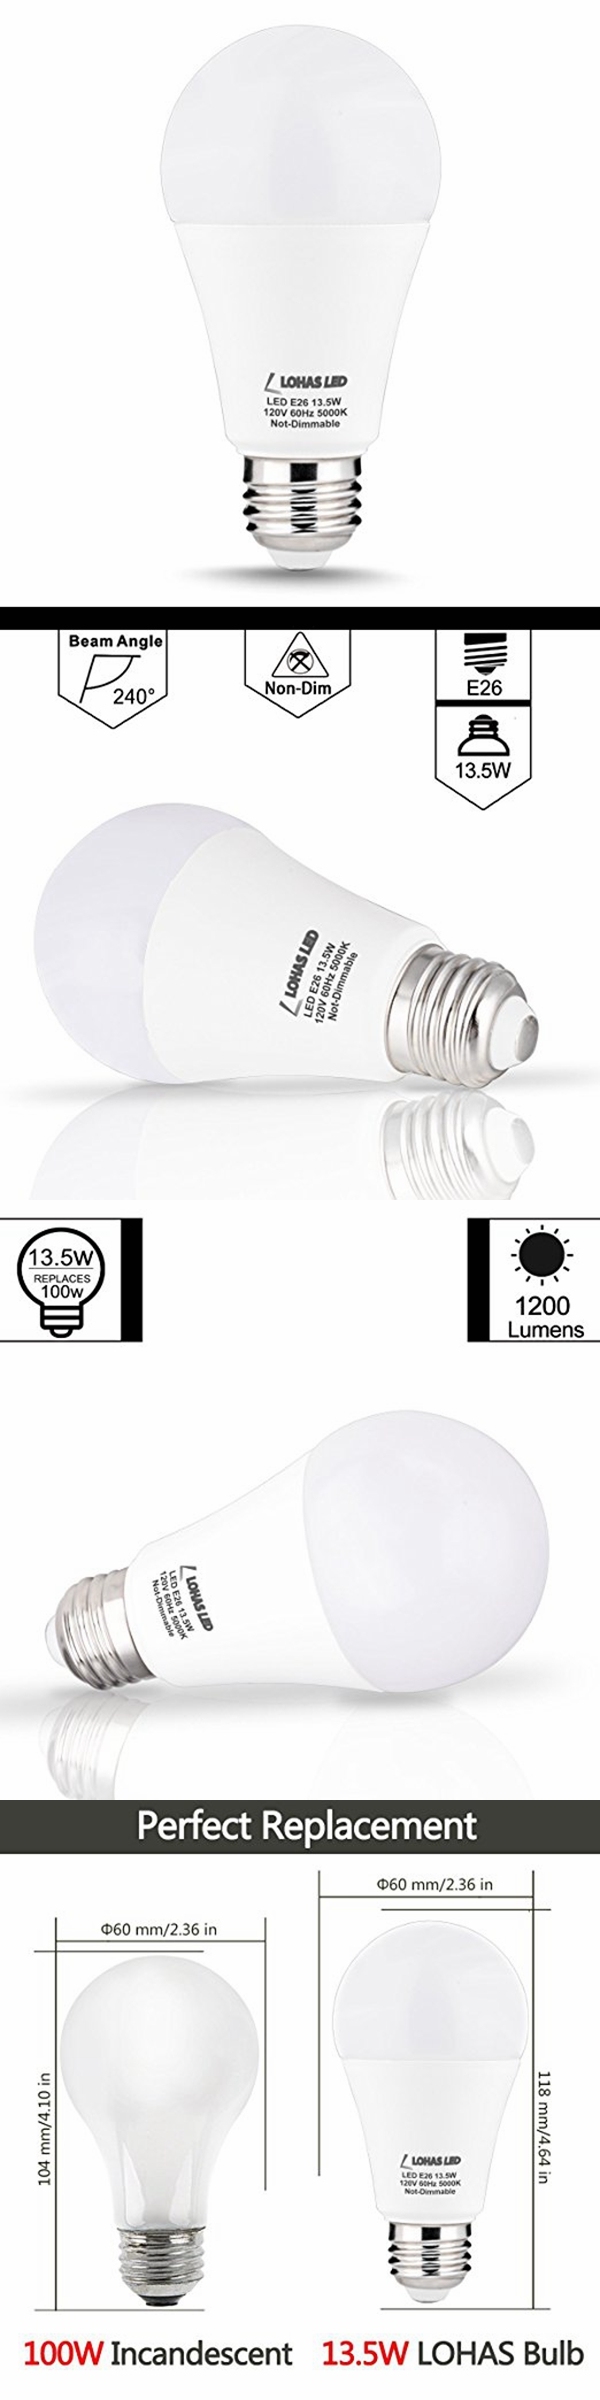 Lohas 13.5W 100W Equivalent LED Light Bulbs Non-Dimmable Daylight White 5000K with UL Listed